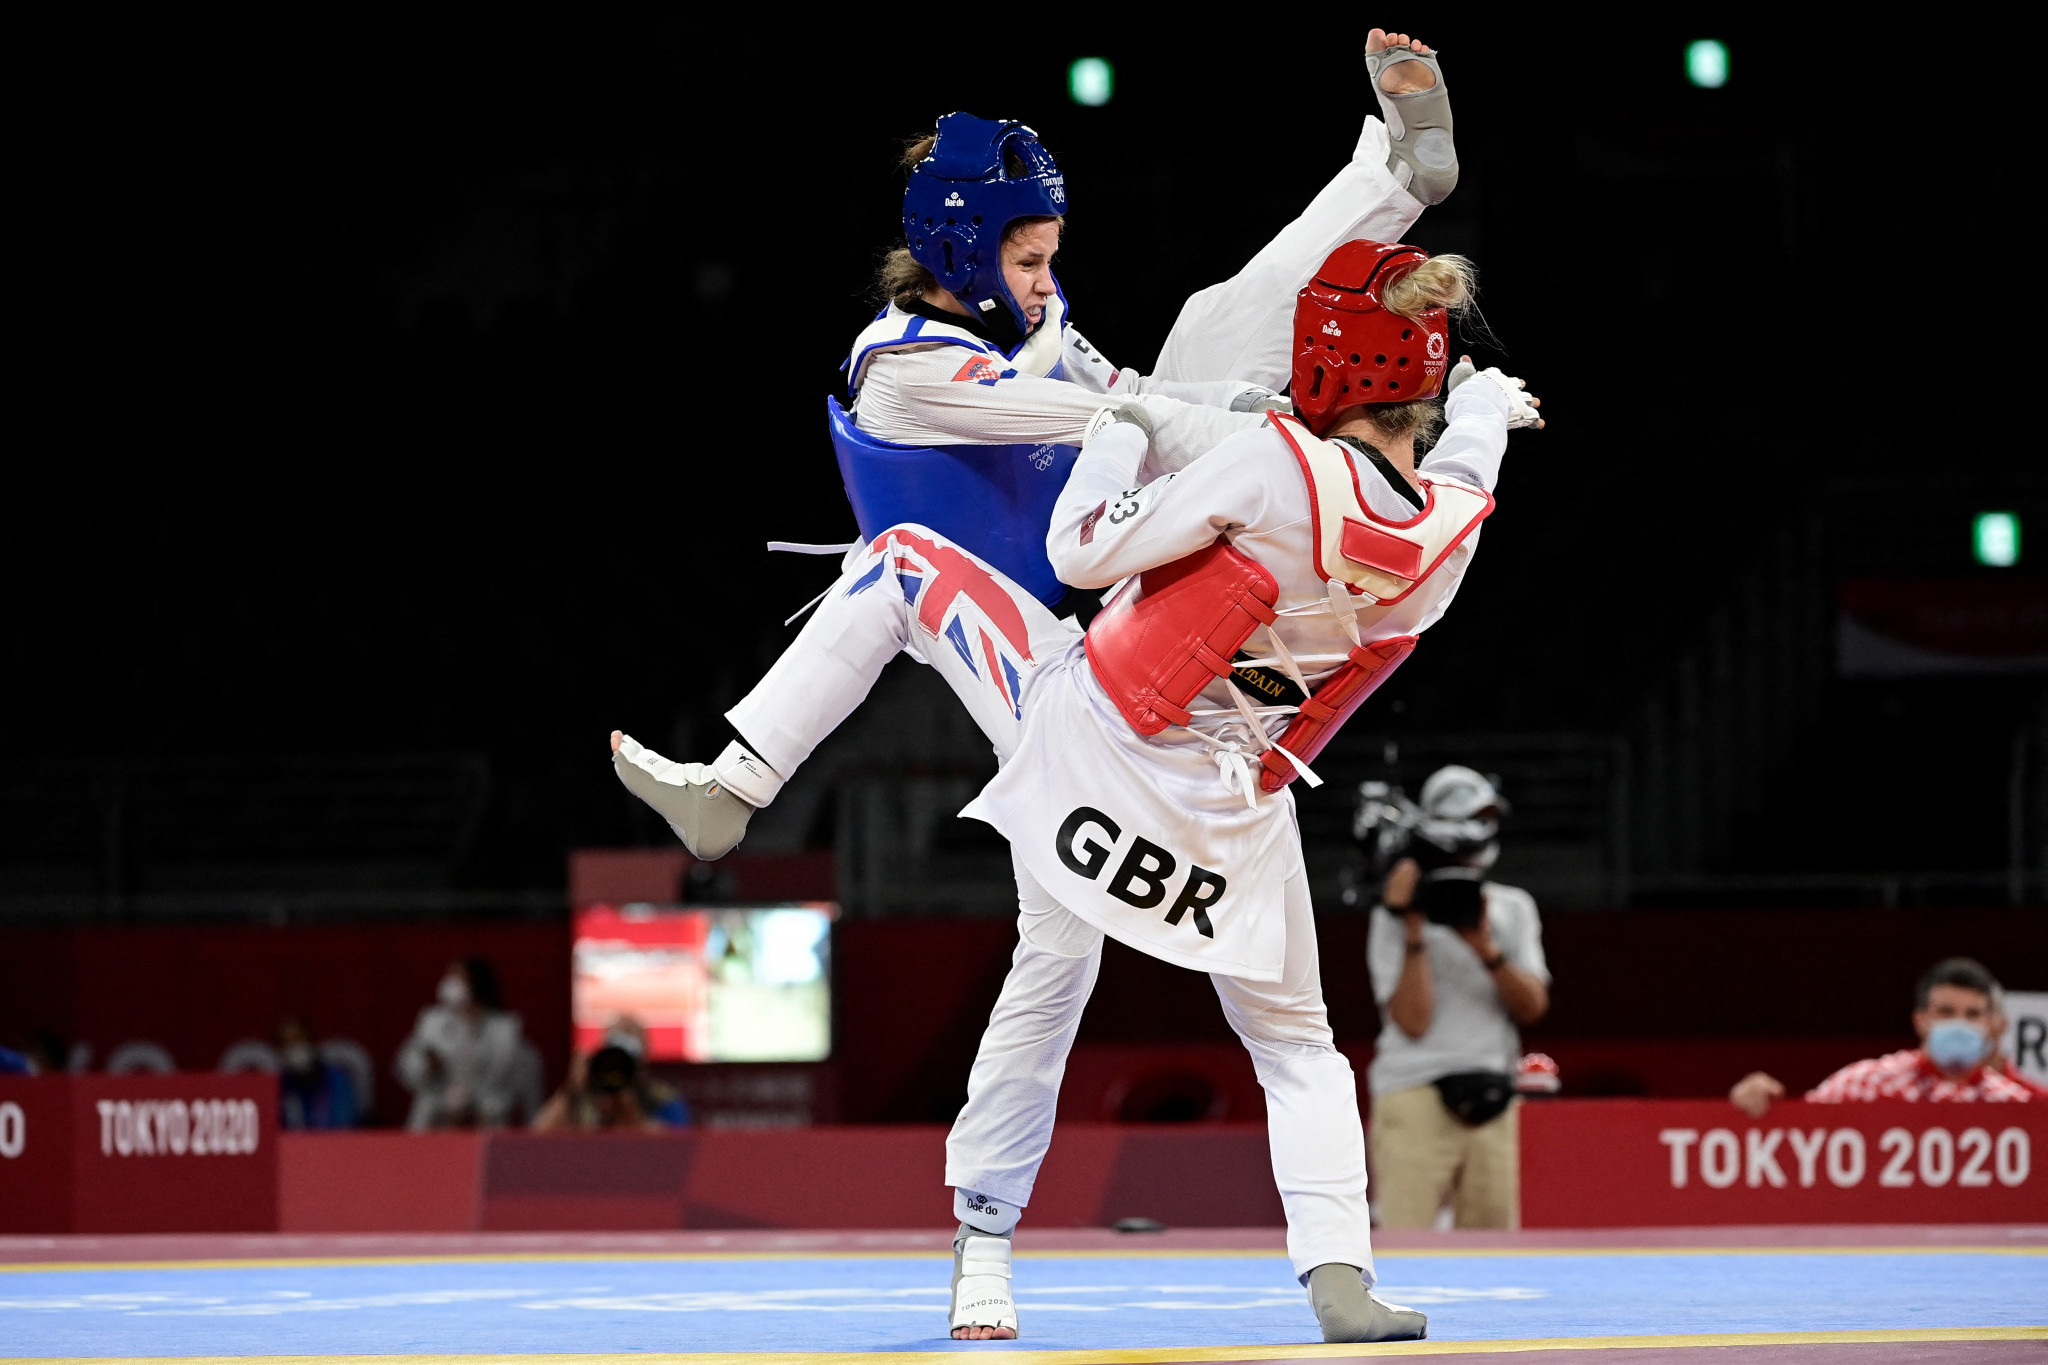 Spanish brand Daedo has partnered with GB Taekwondo for a period of three years ©Getty Images